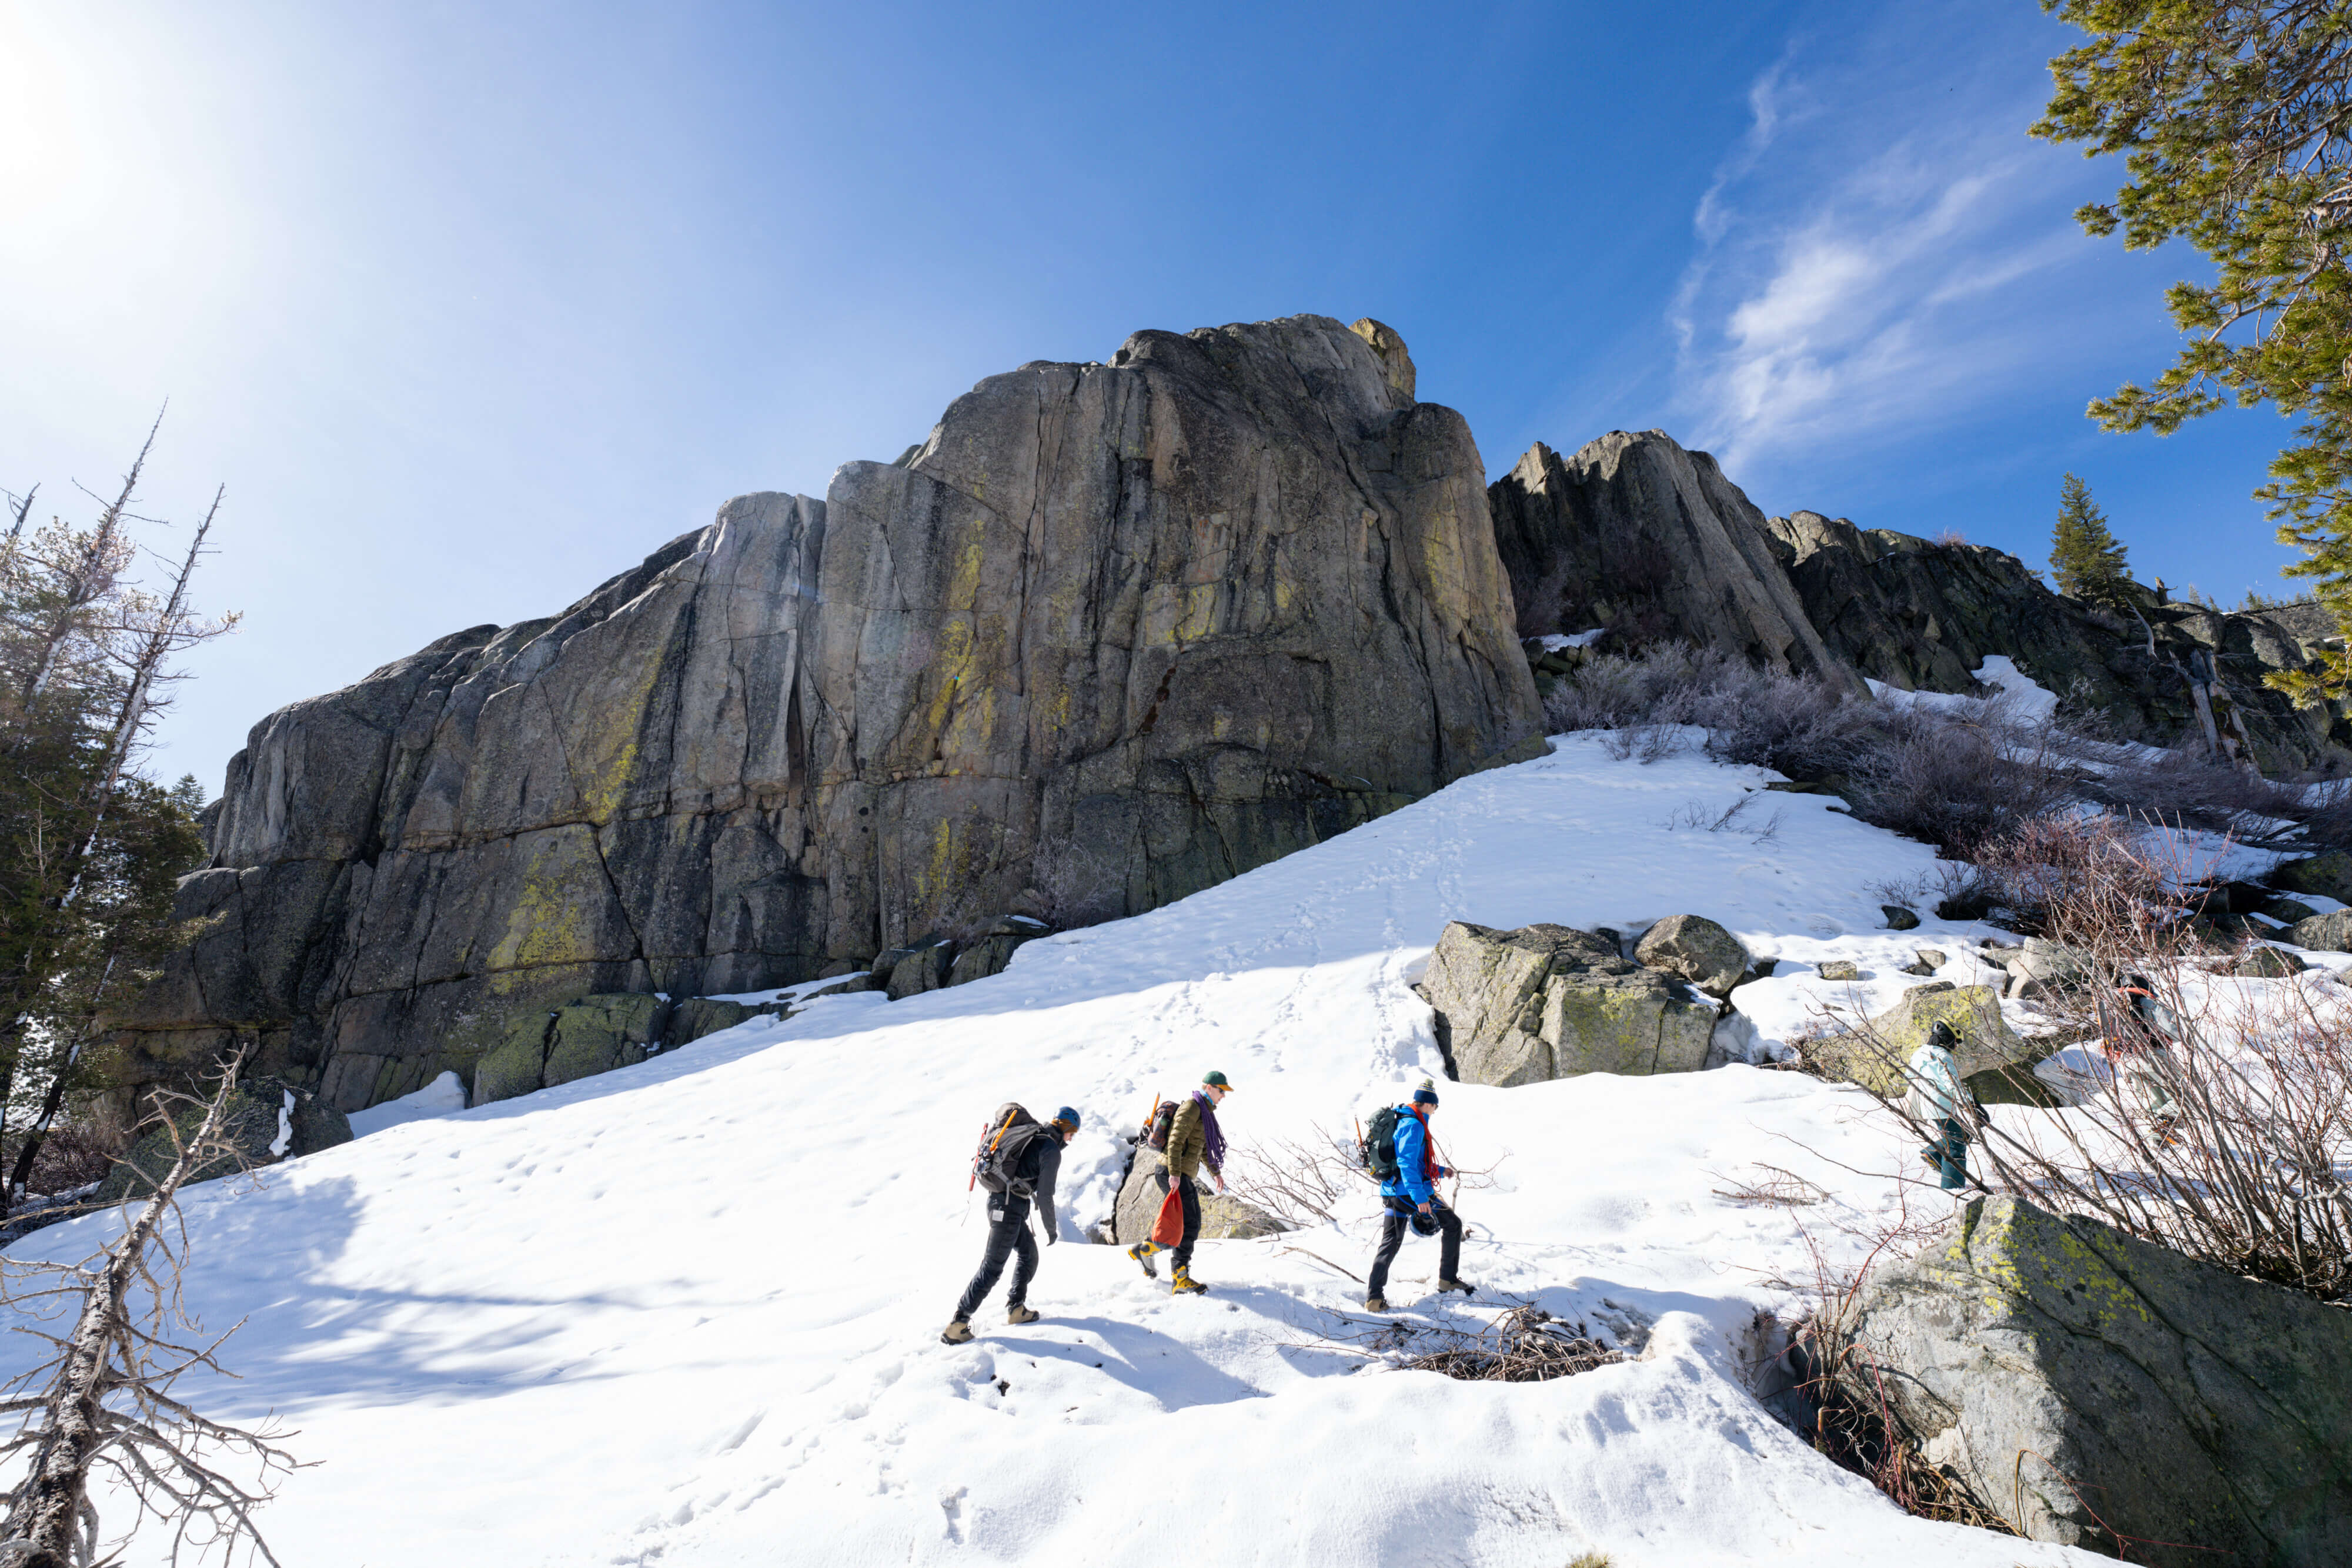 Climbers walk on snow in front of Snowshed on Donner Summit during an intro to mountaineering course in Tahoe